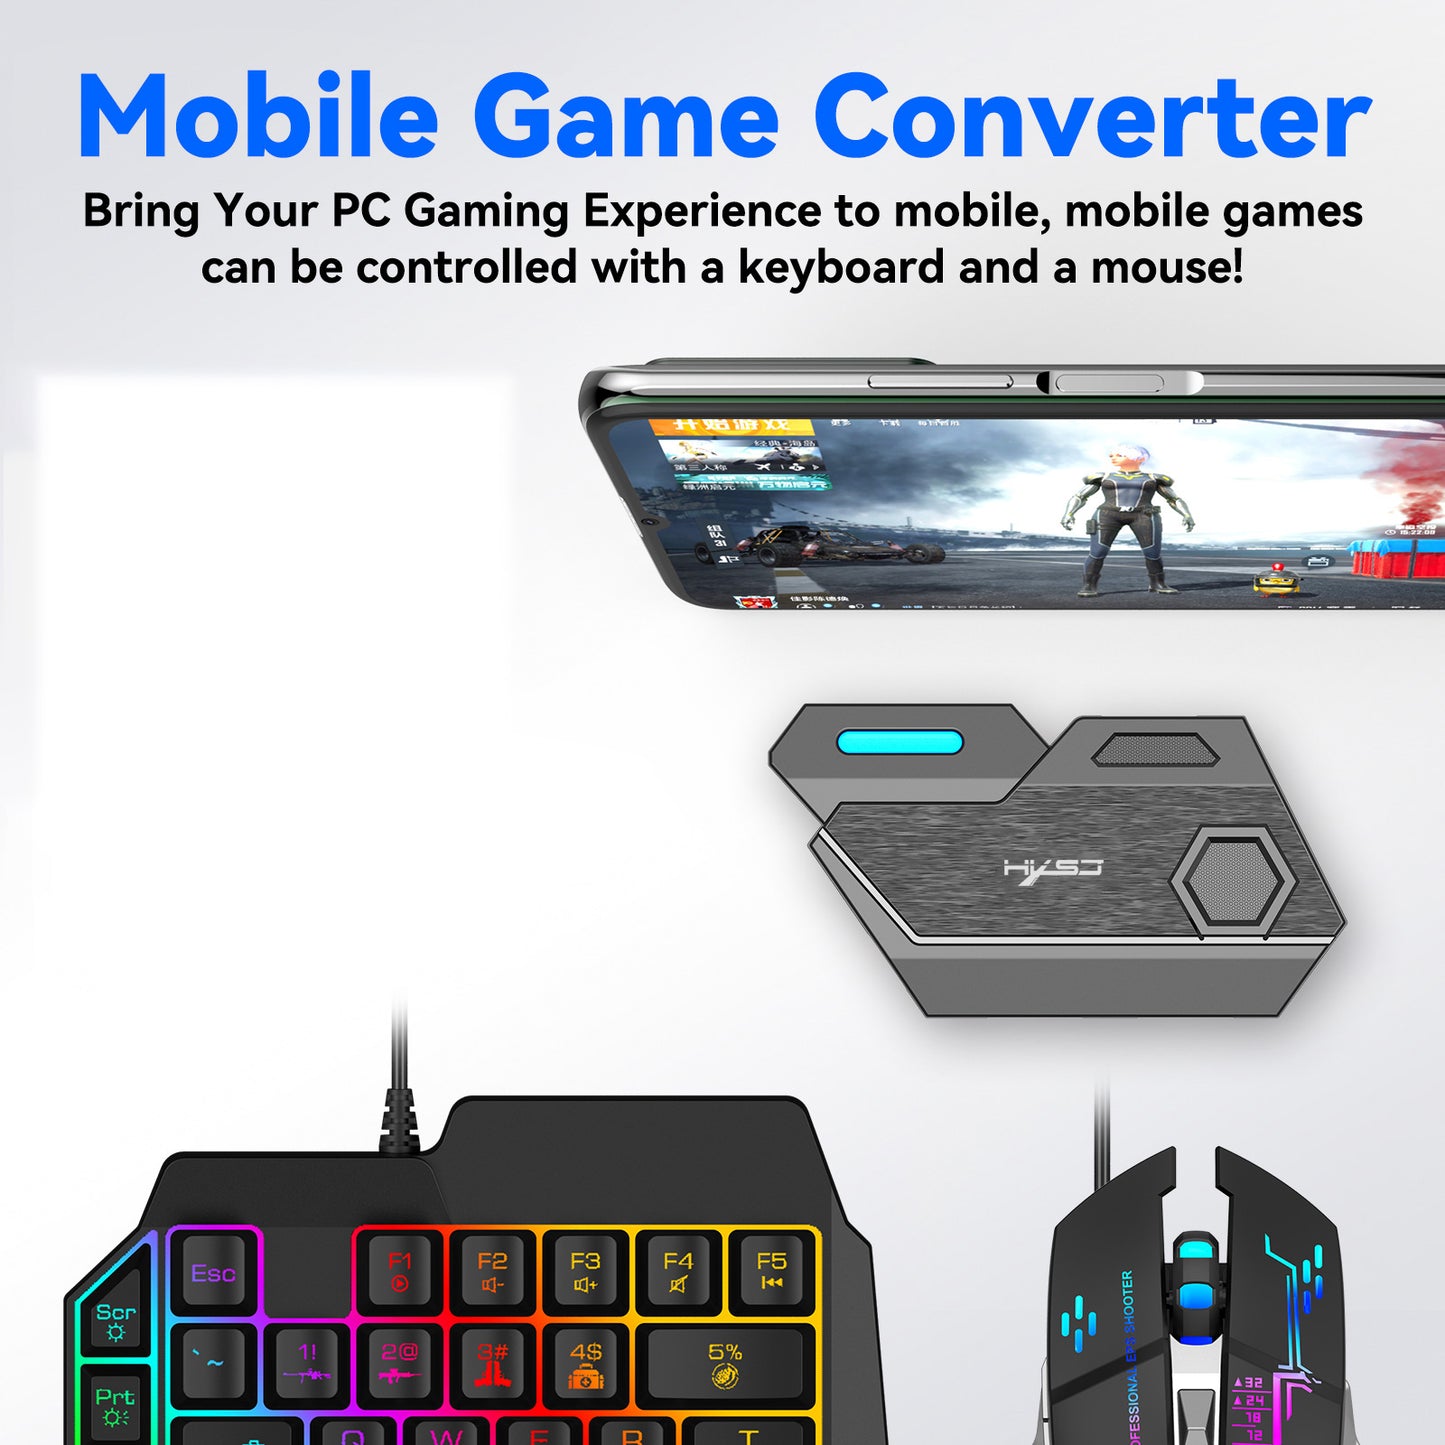 HXSJ Portable Mobile Phone Game Wired Keyboard Mouse Converter Bluetooth Adapter